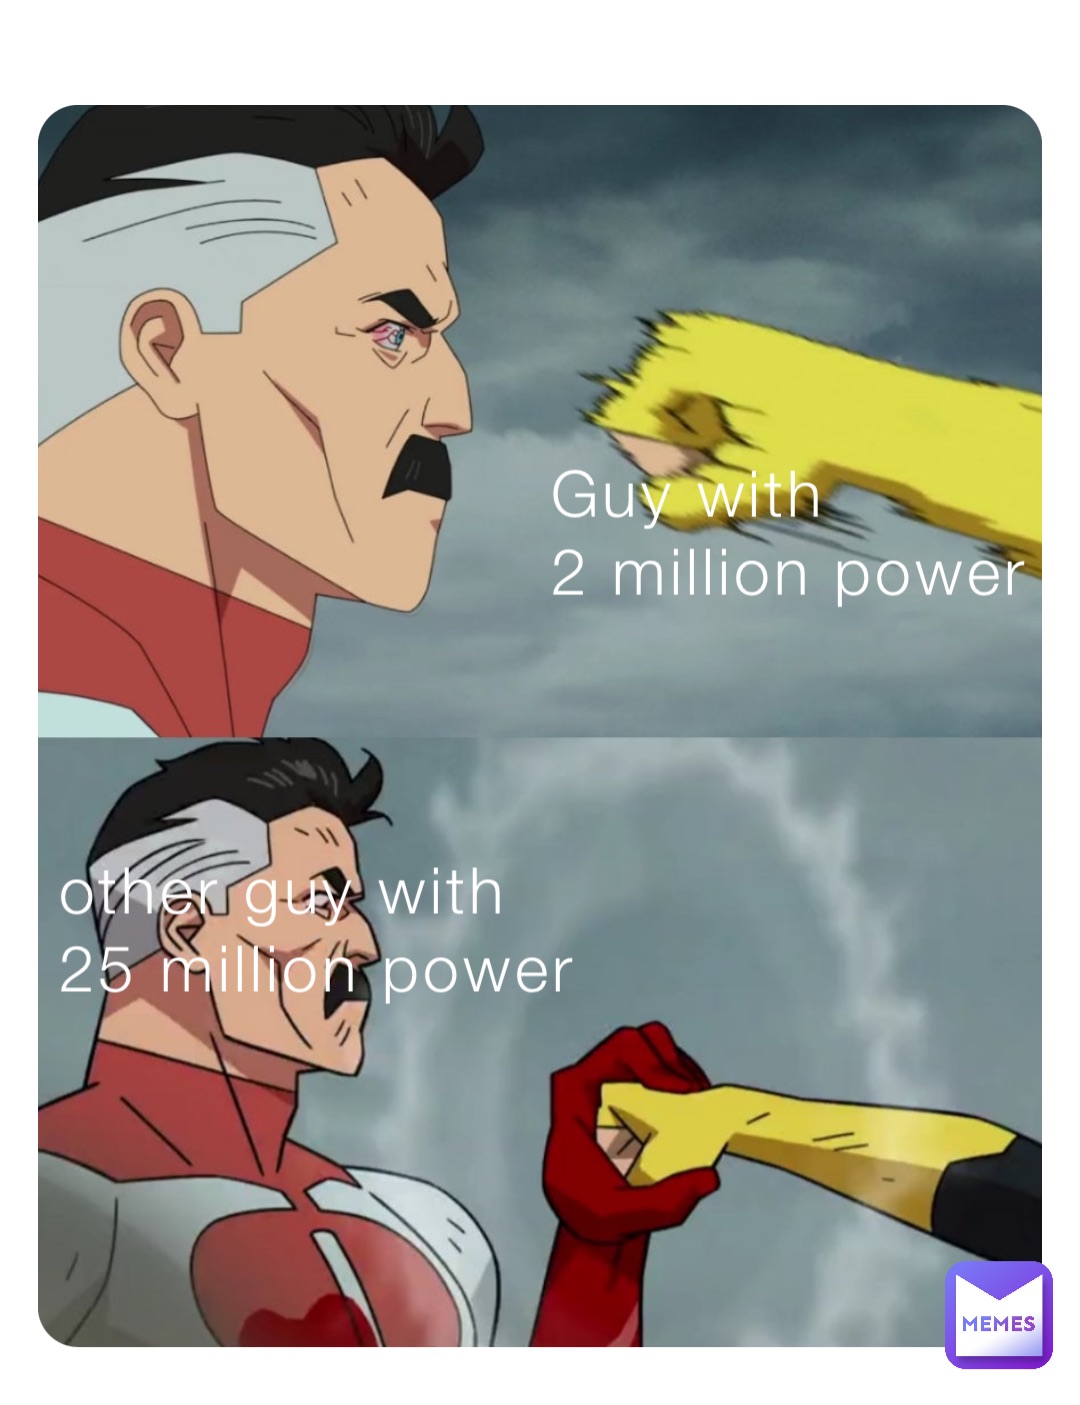 Guy with 
2 million power other guy with 
25 million power